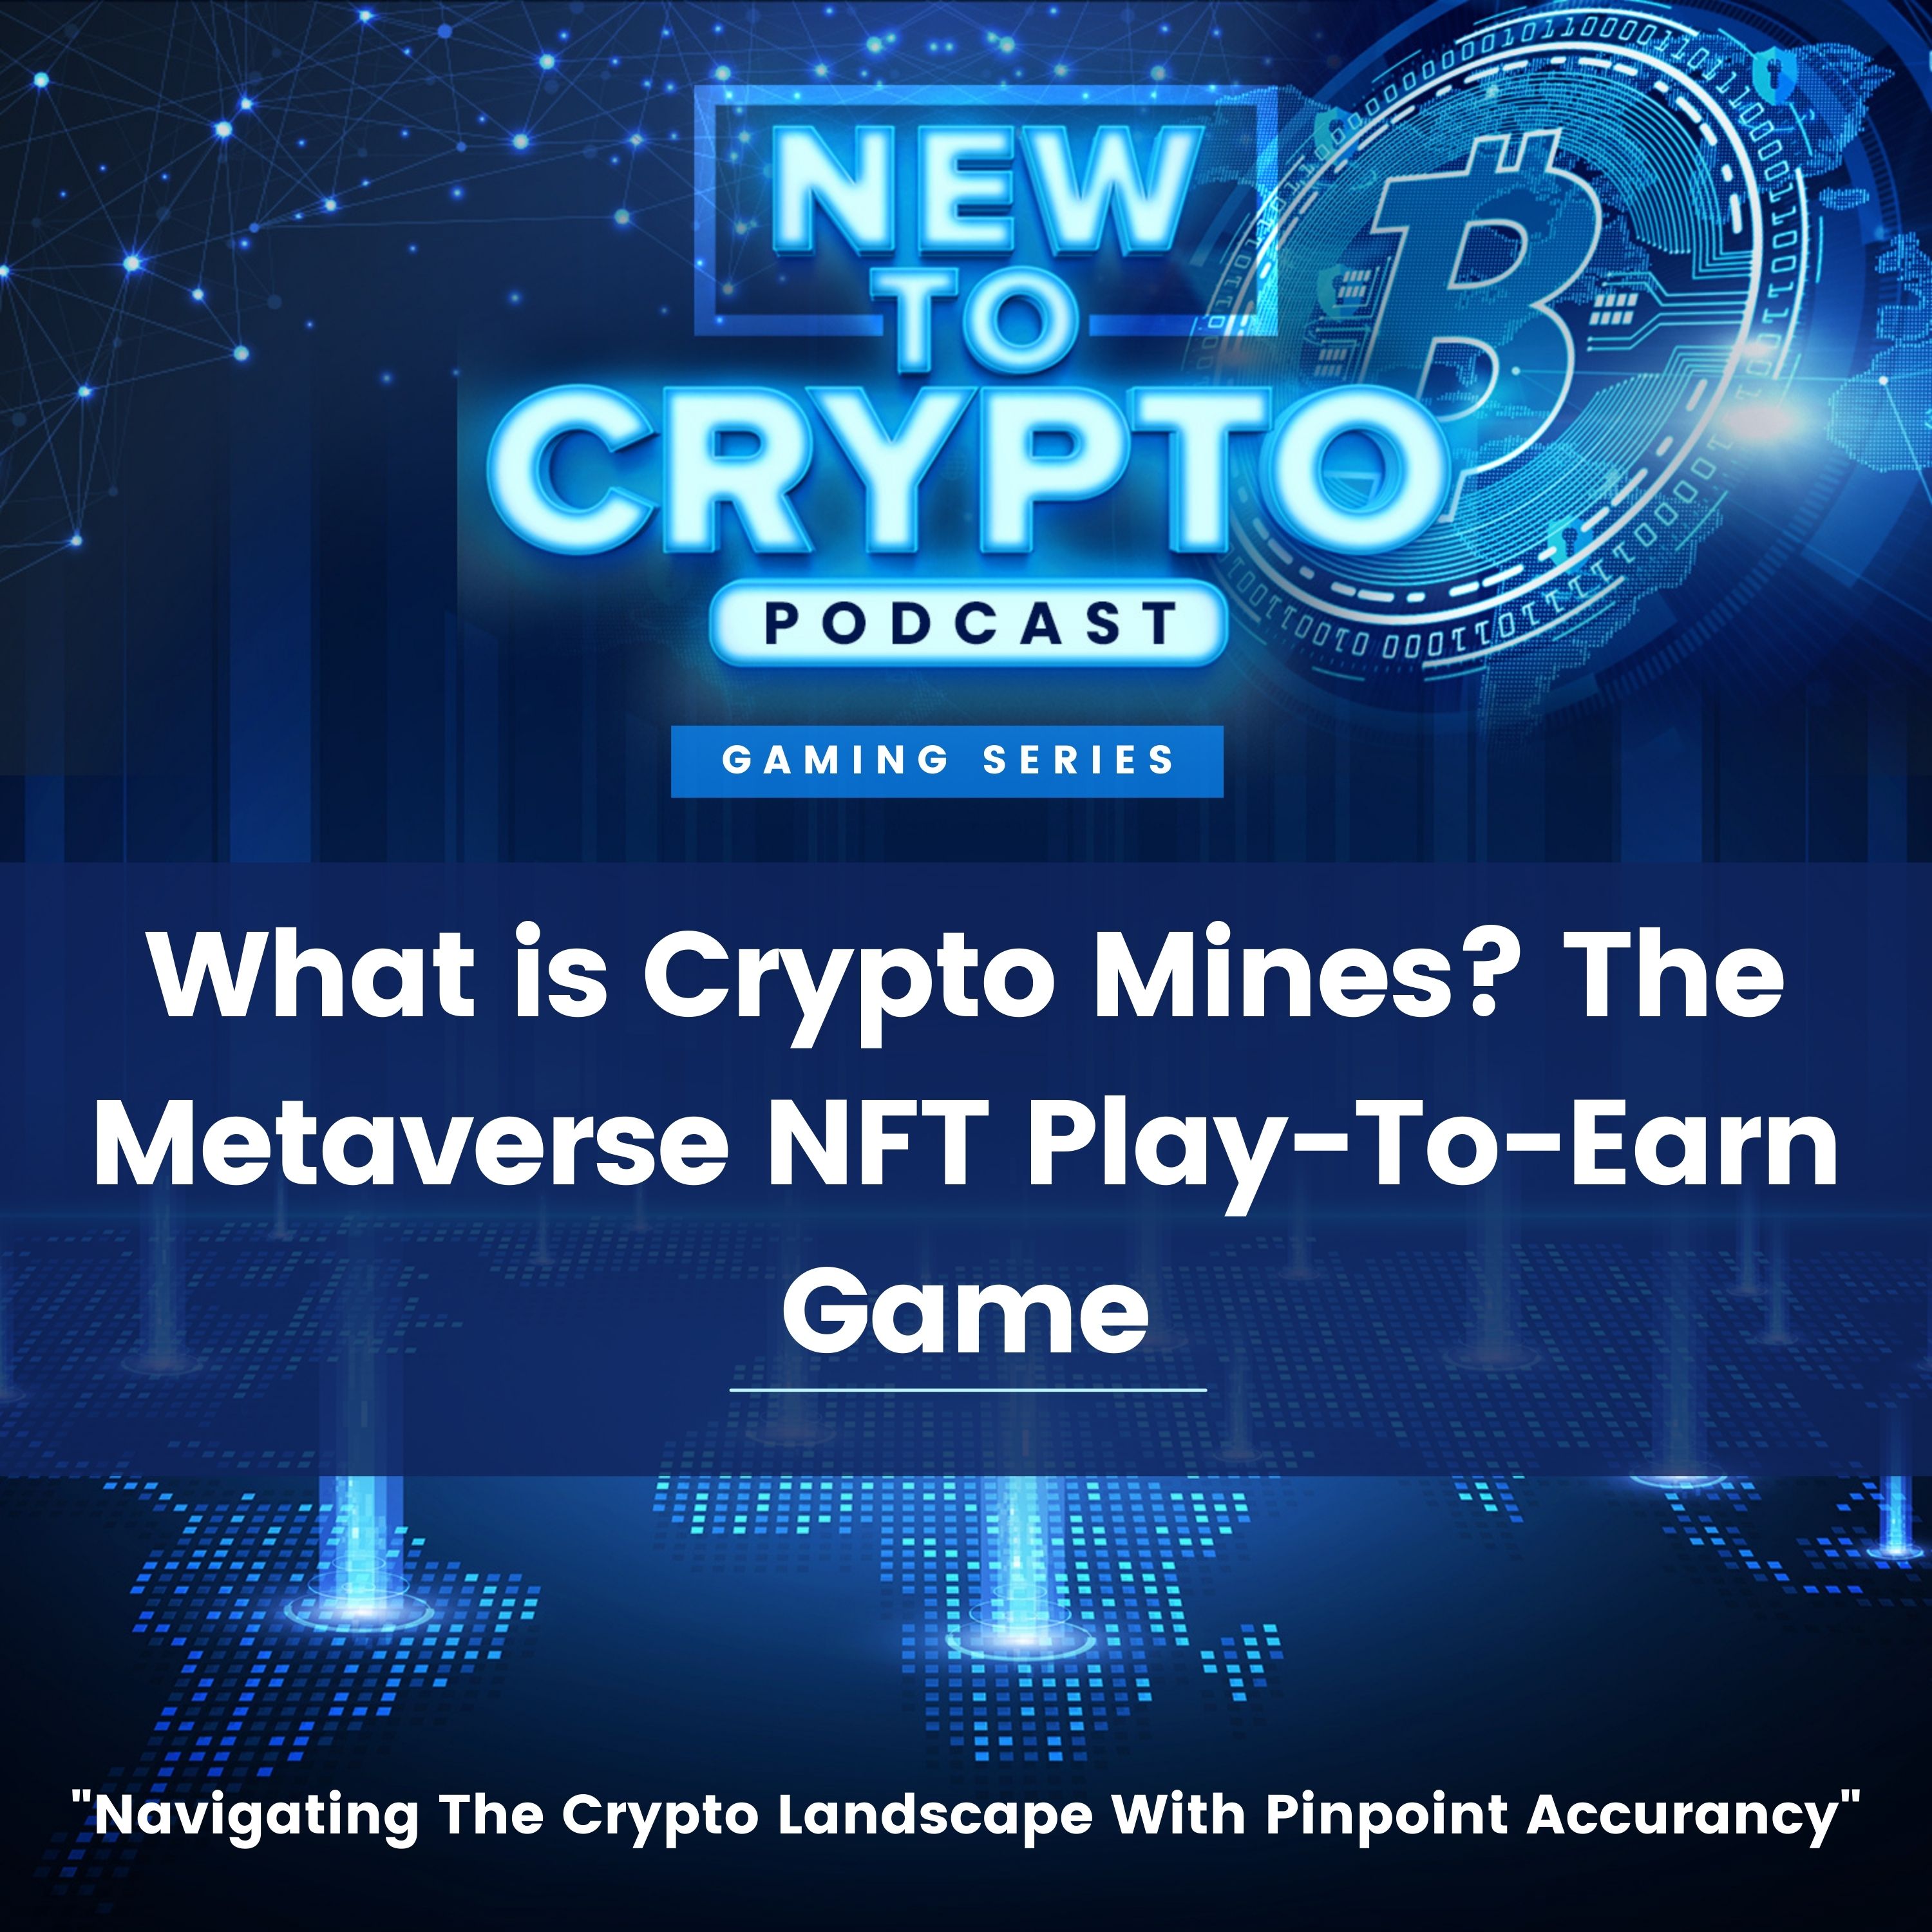 What is Crypto Mines? The Metaverse NFT Play-To-Earn Game